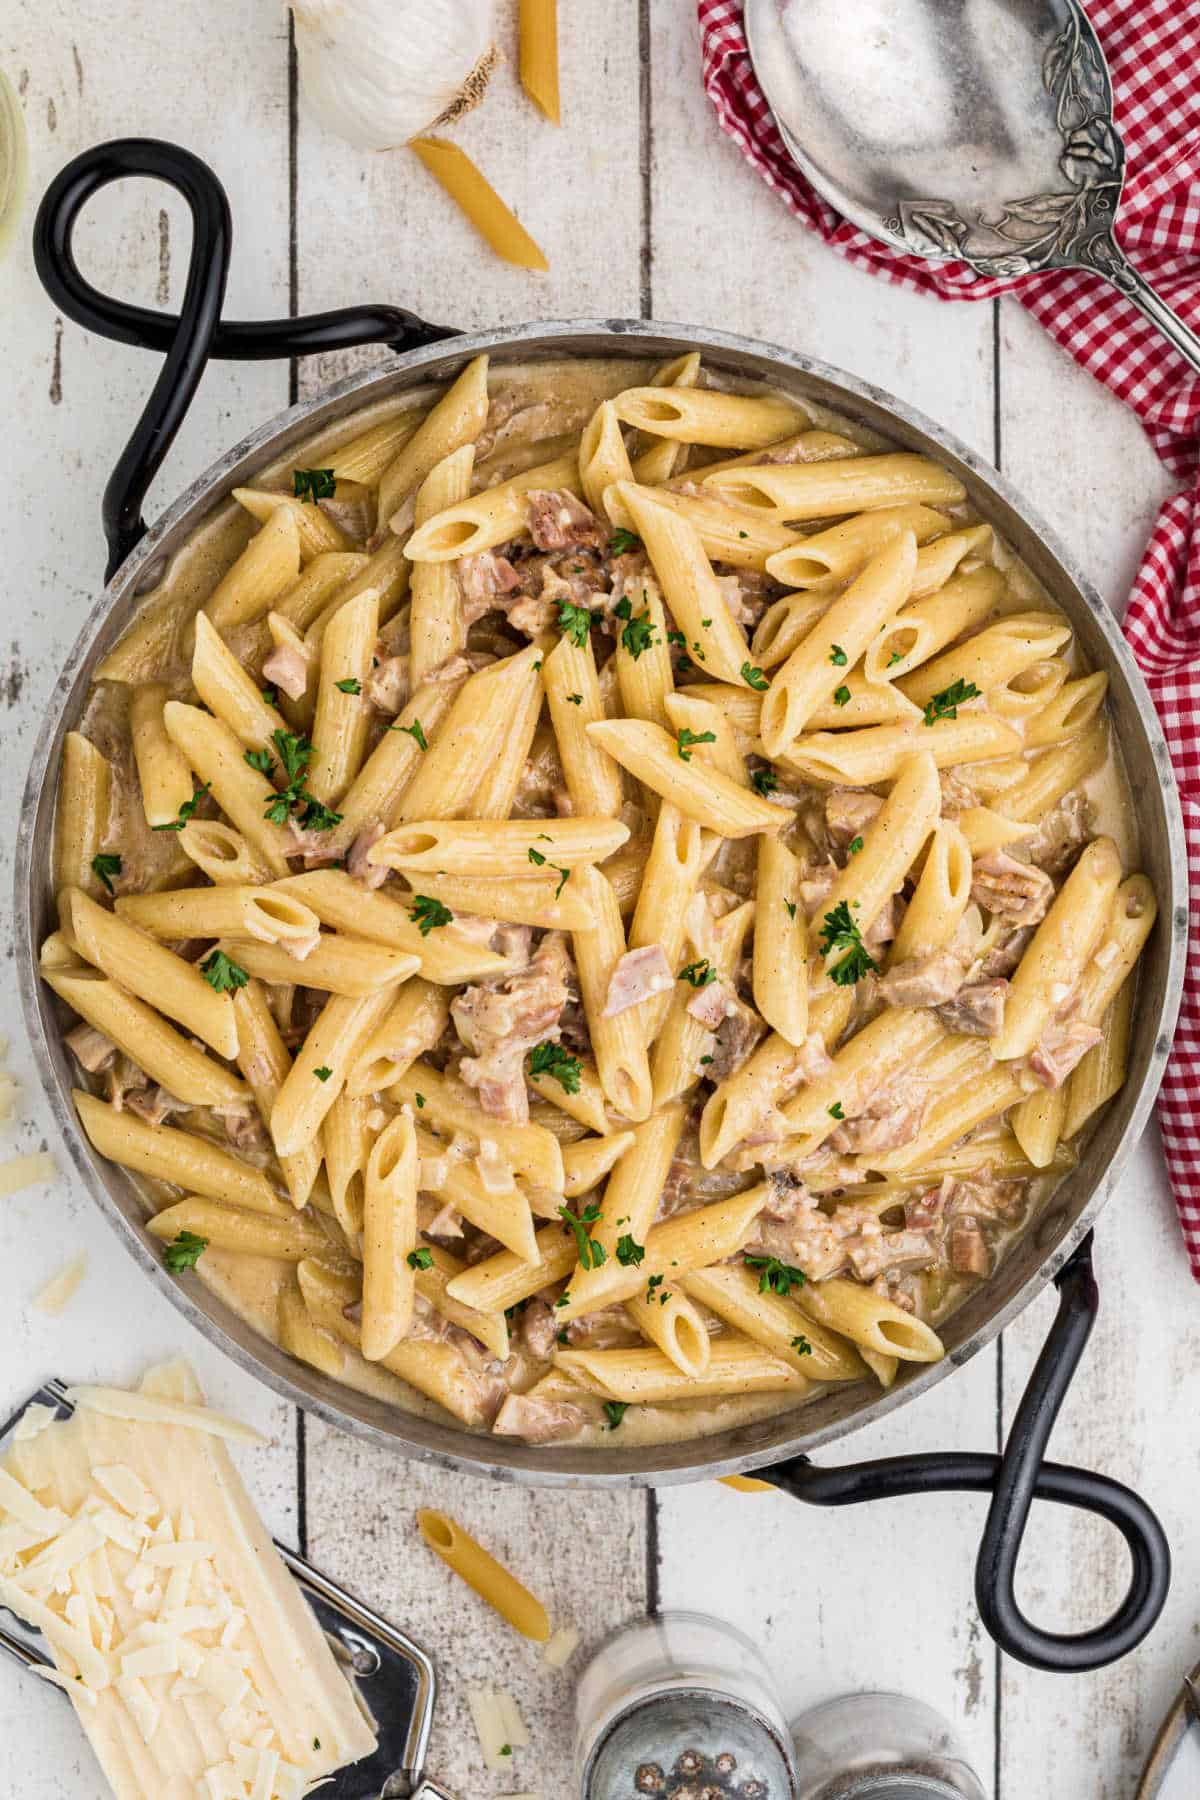 Spoon on the side, a one pot turkey pasta with some cheese on the side.